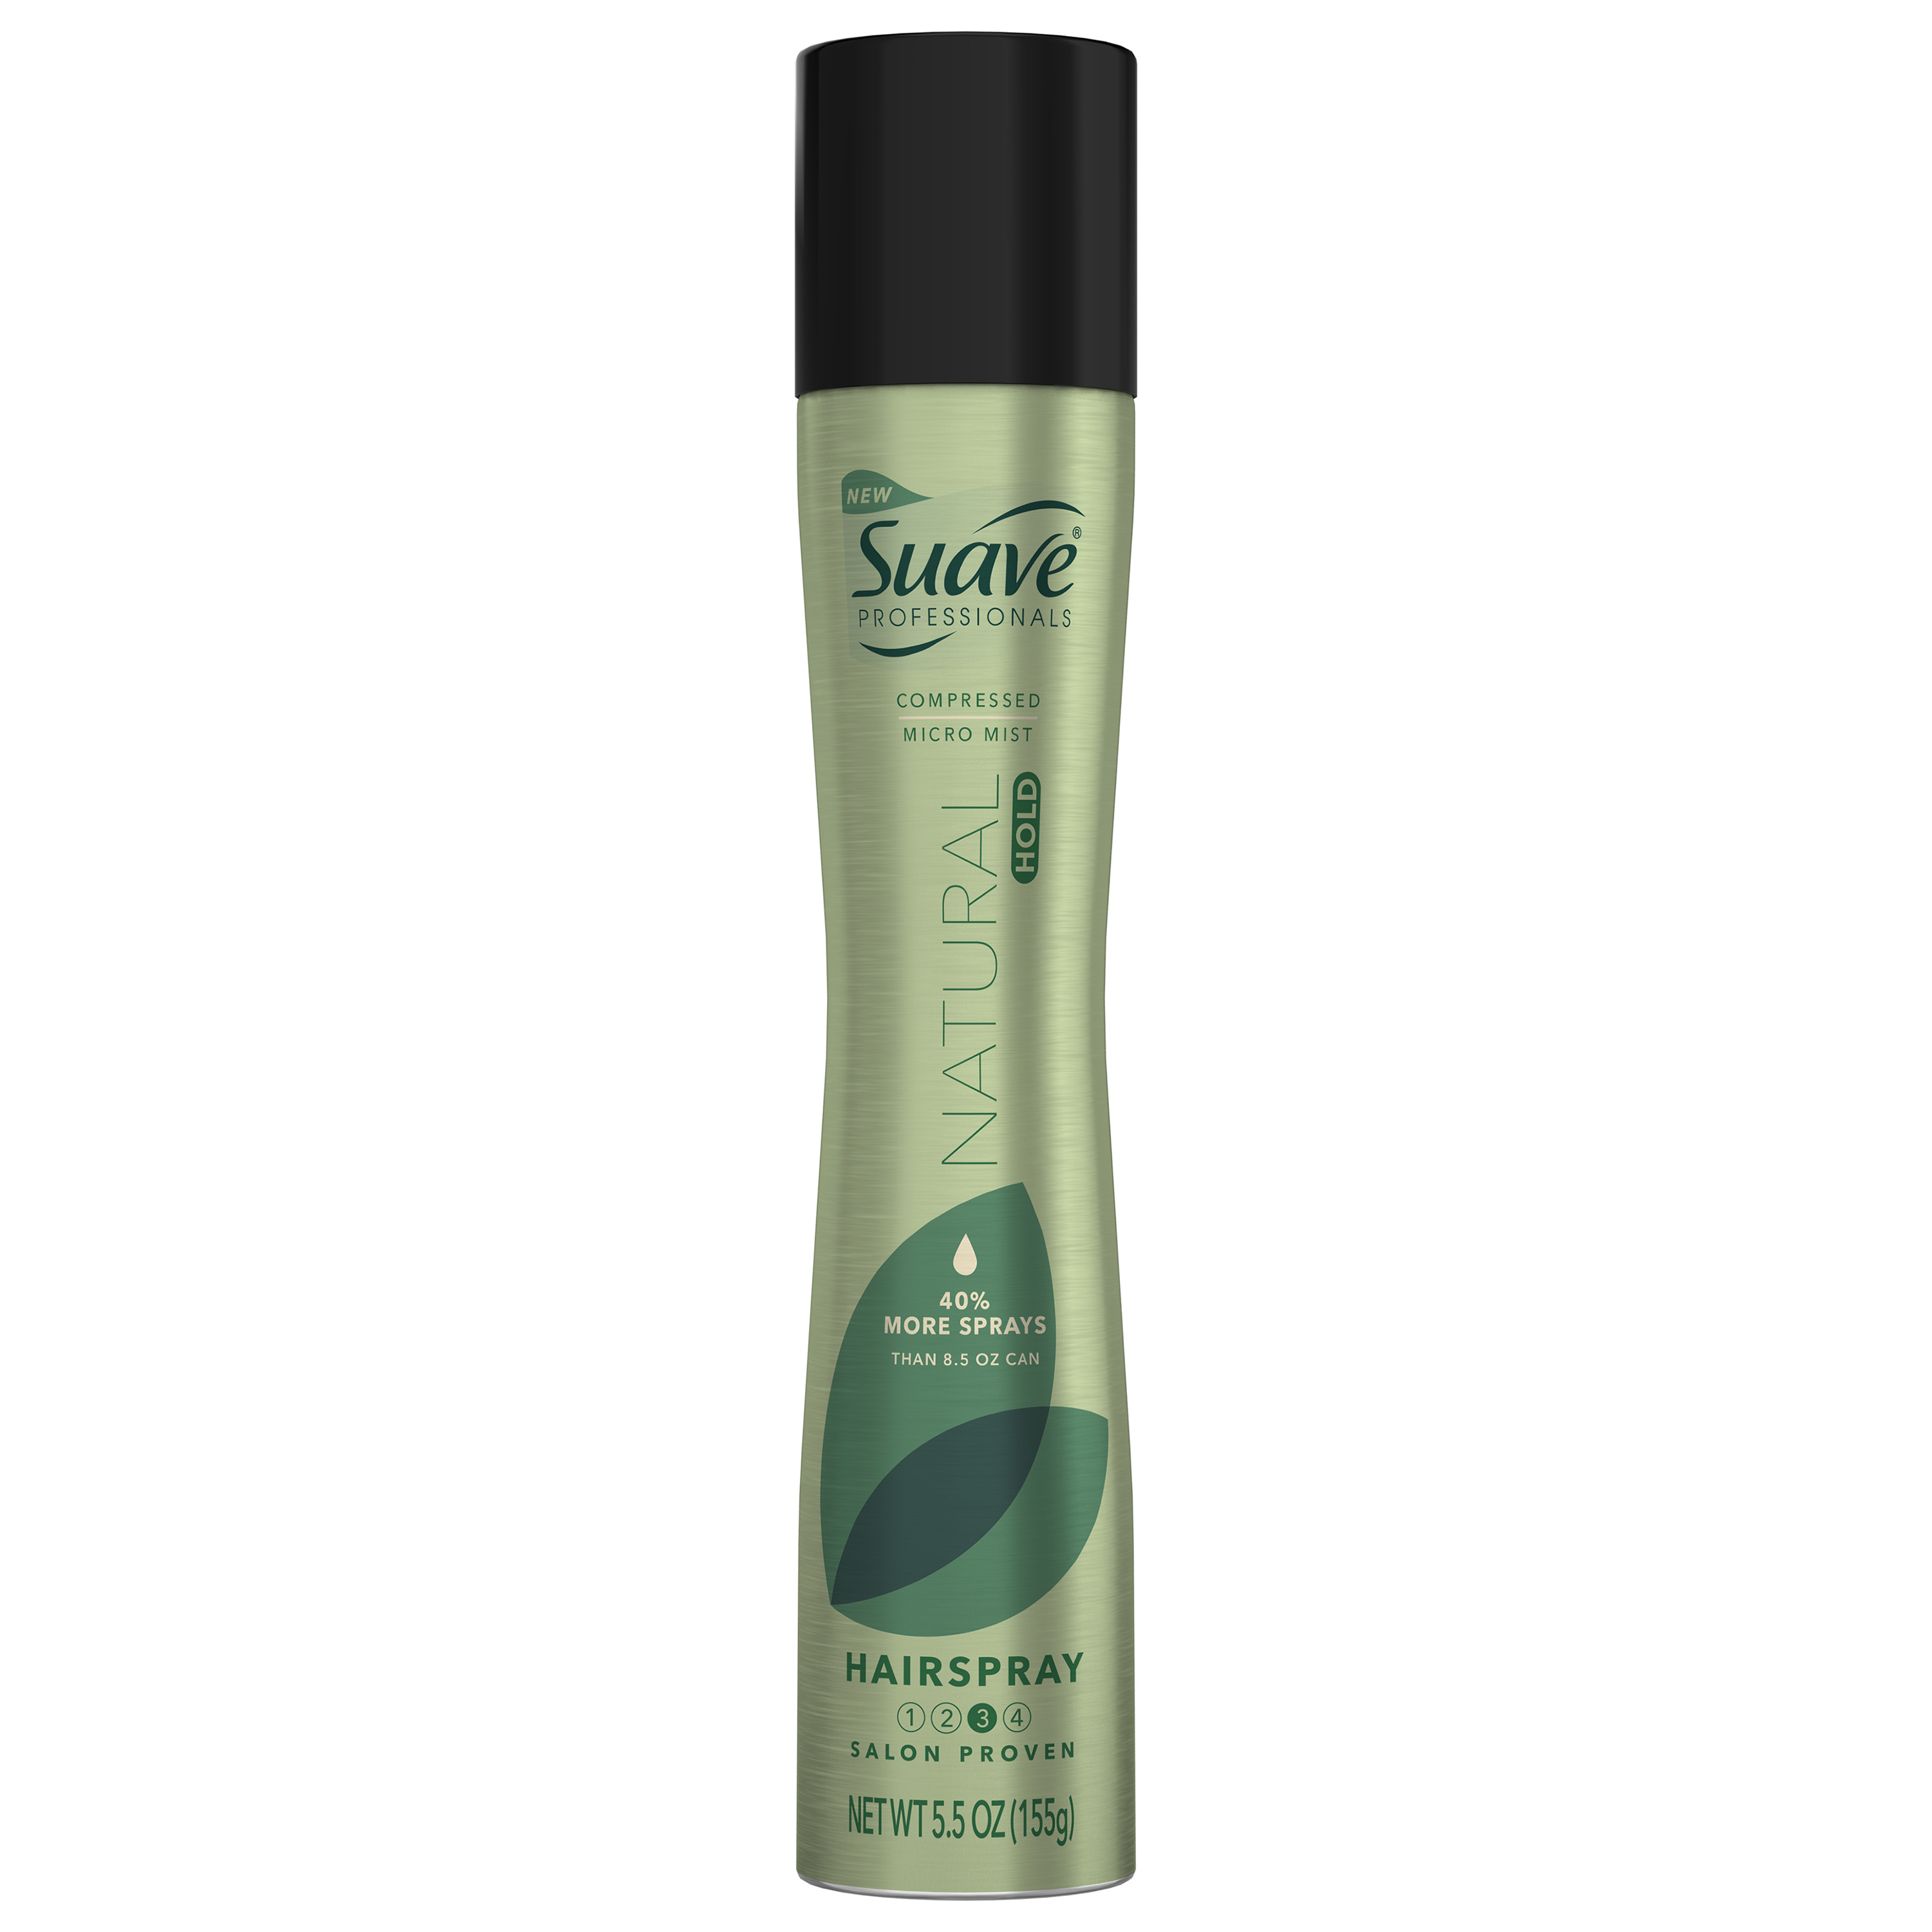 Suave Professionals Compressed Micro Mist Natural Hold Hairspray, 5.5 oz - image 1 of 13